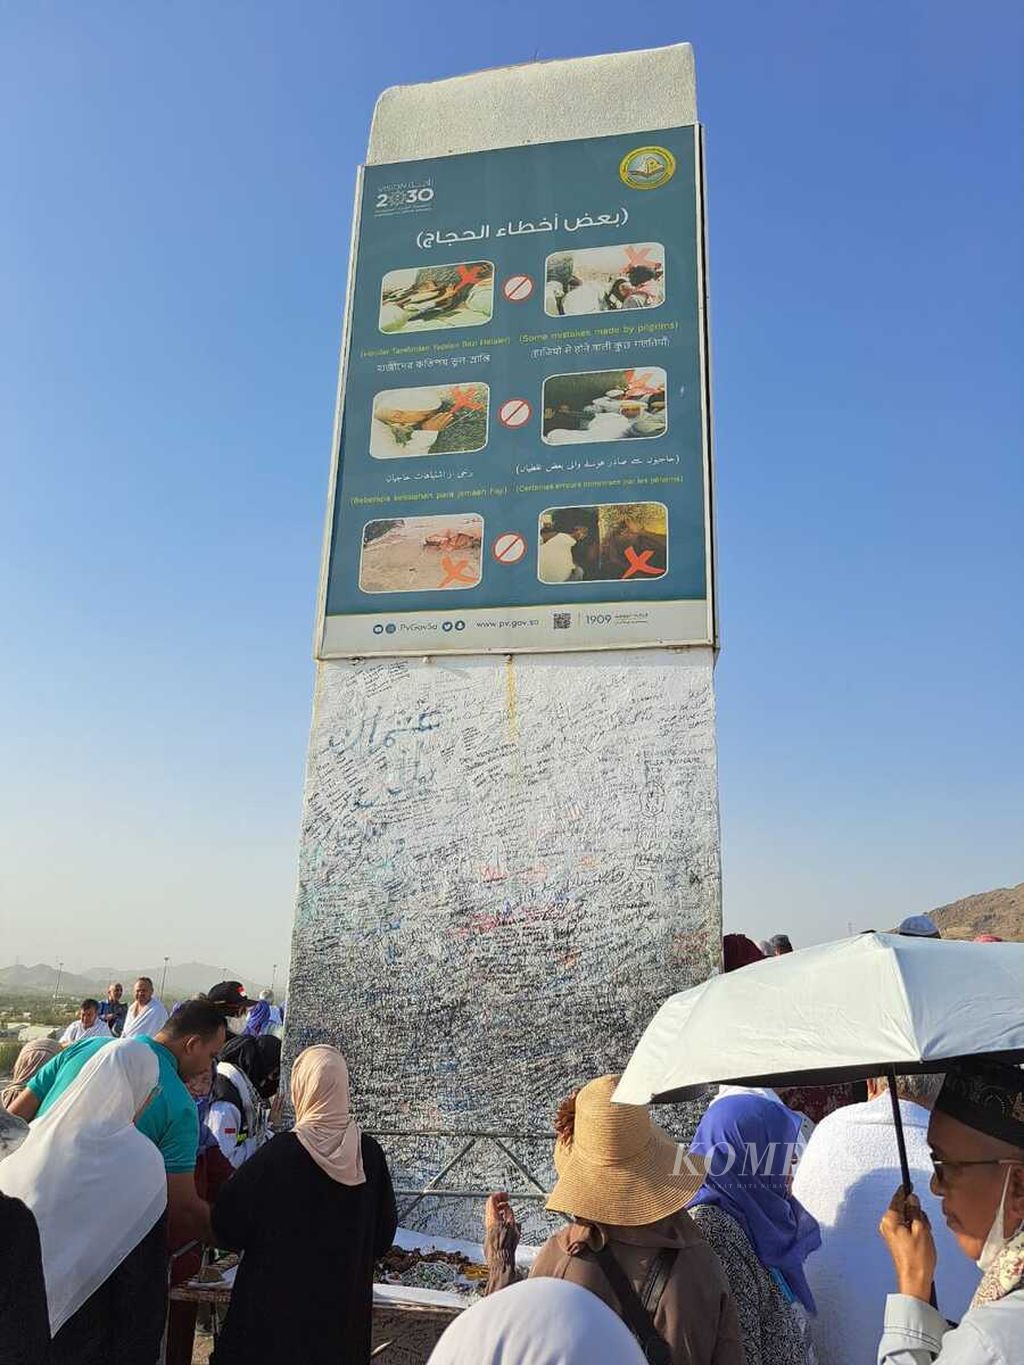 The Jabal Rahmah peak was crowded with visitors, as captured on Wednesday (12/7/2023) afternoon in Saudi Arabia time. Every year, during the standing at Arafat, hajj pilgrims always try to make time to visit Jabal Rahmah even though there is no command to do so.